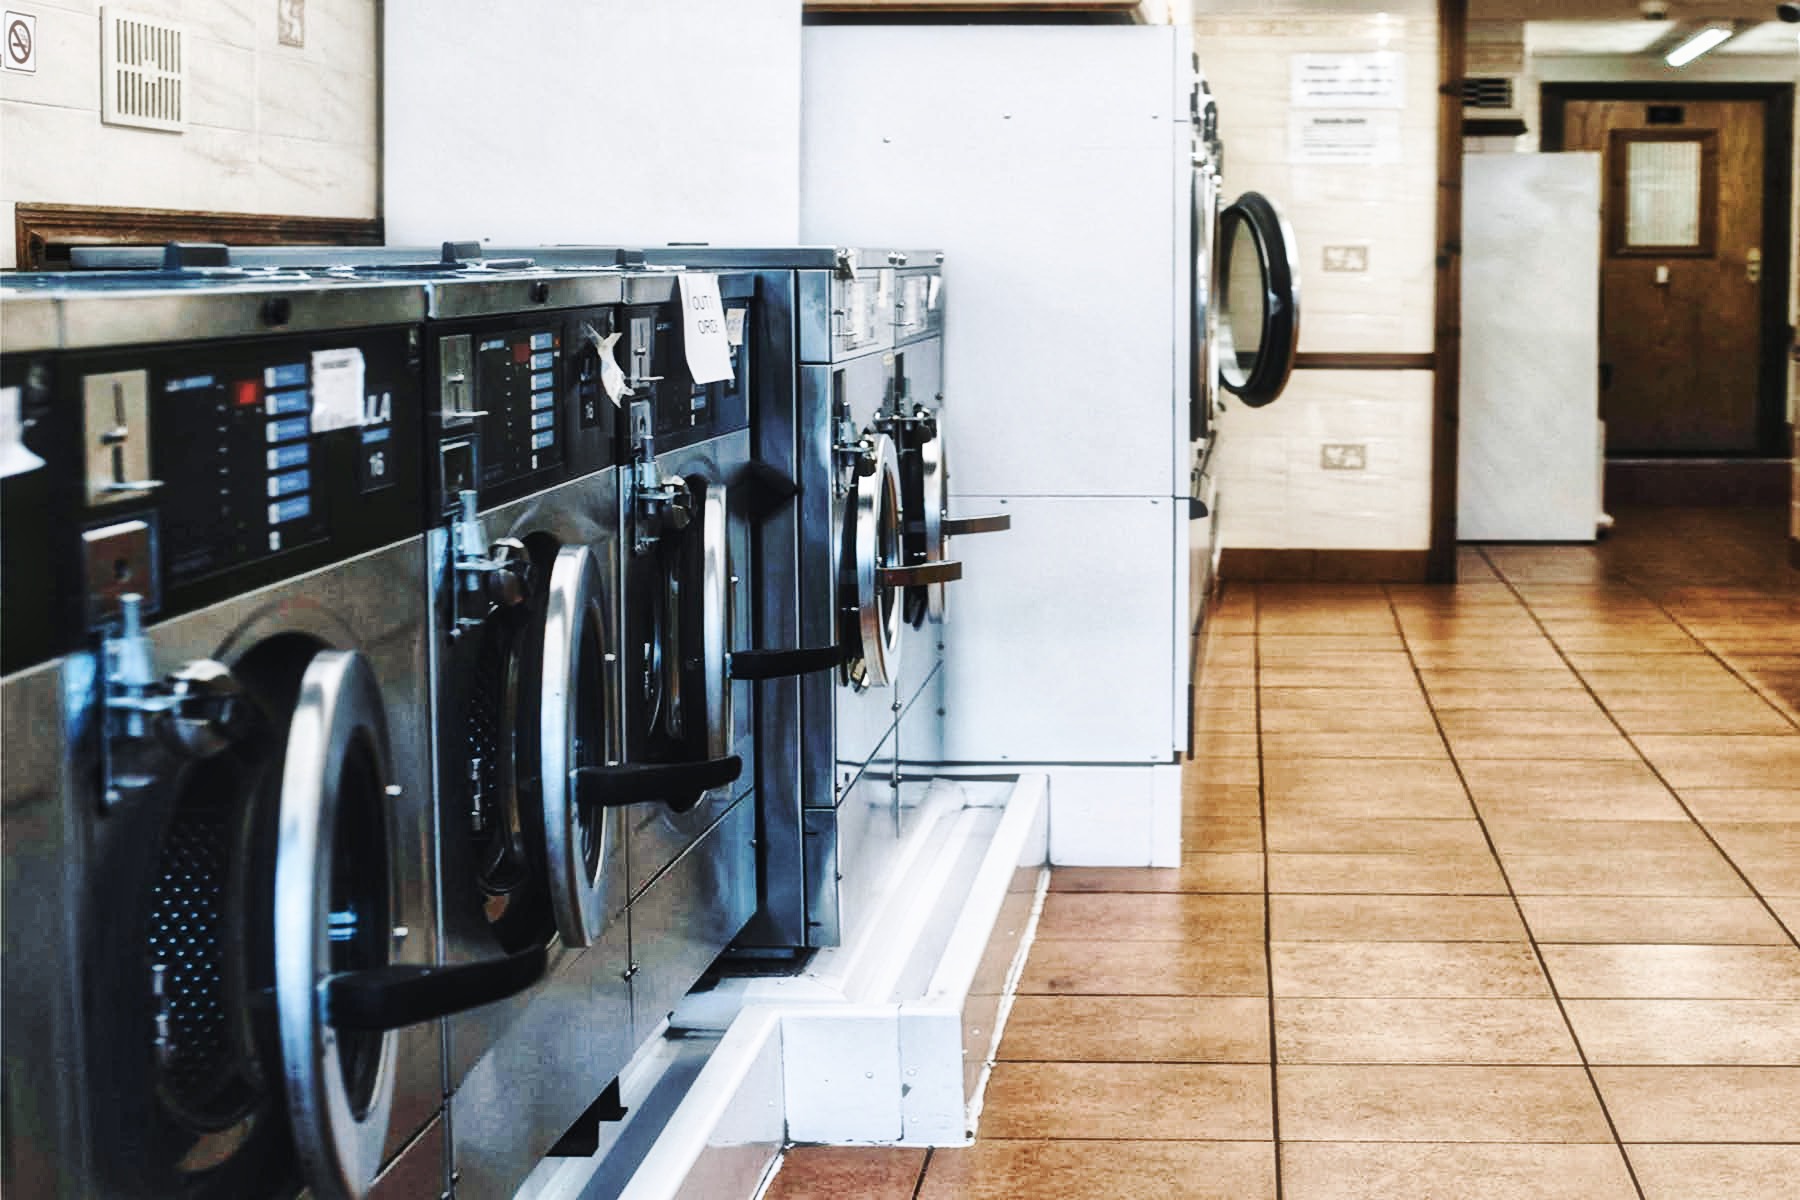 Elevate your laundry experience with expert Dexter coin-operated washer and dryer repair in Pflugerville, TX